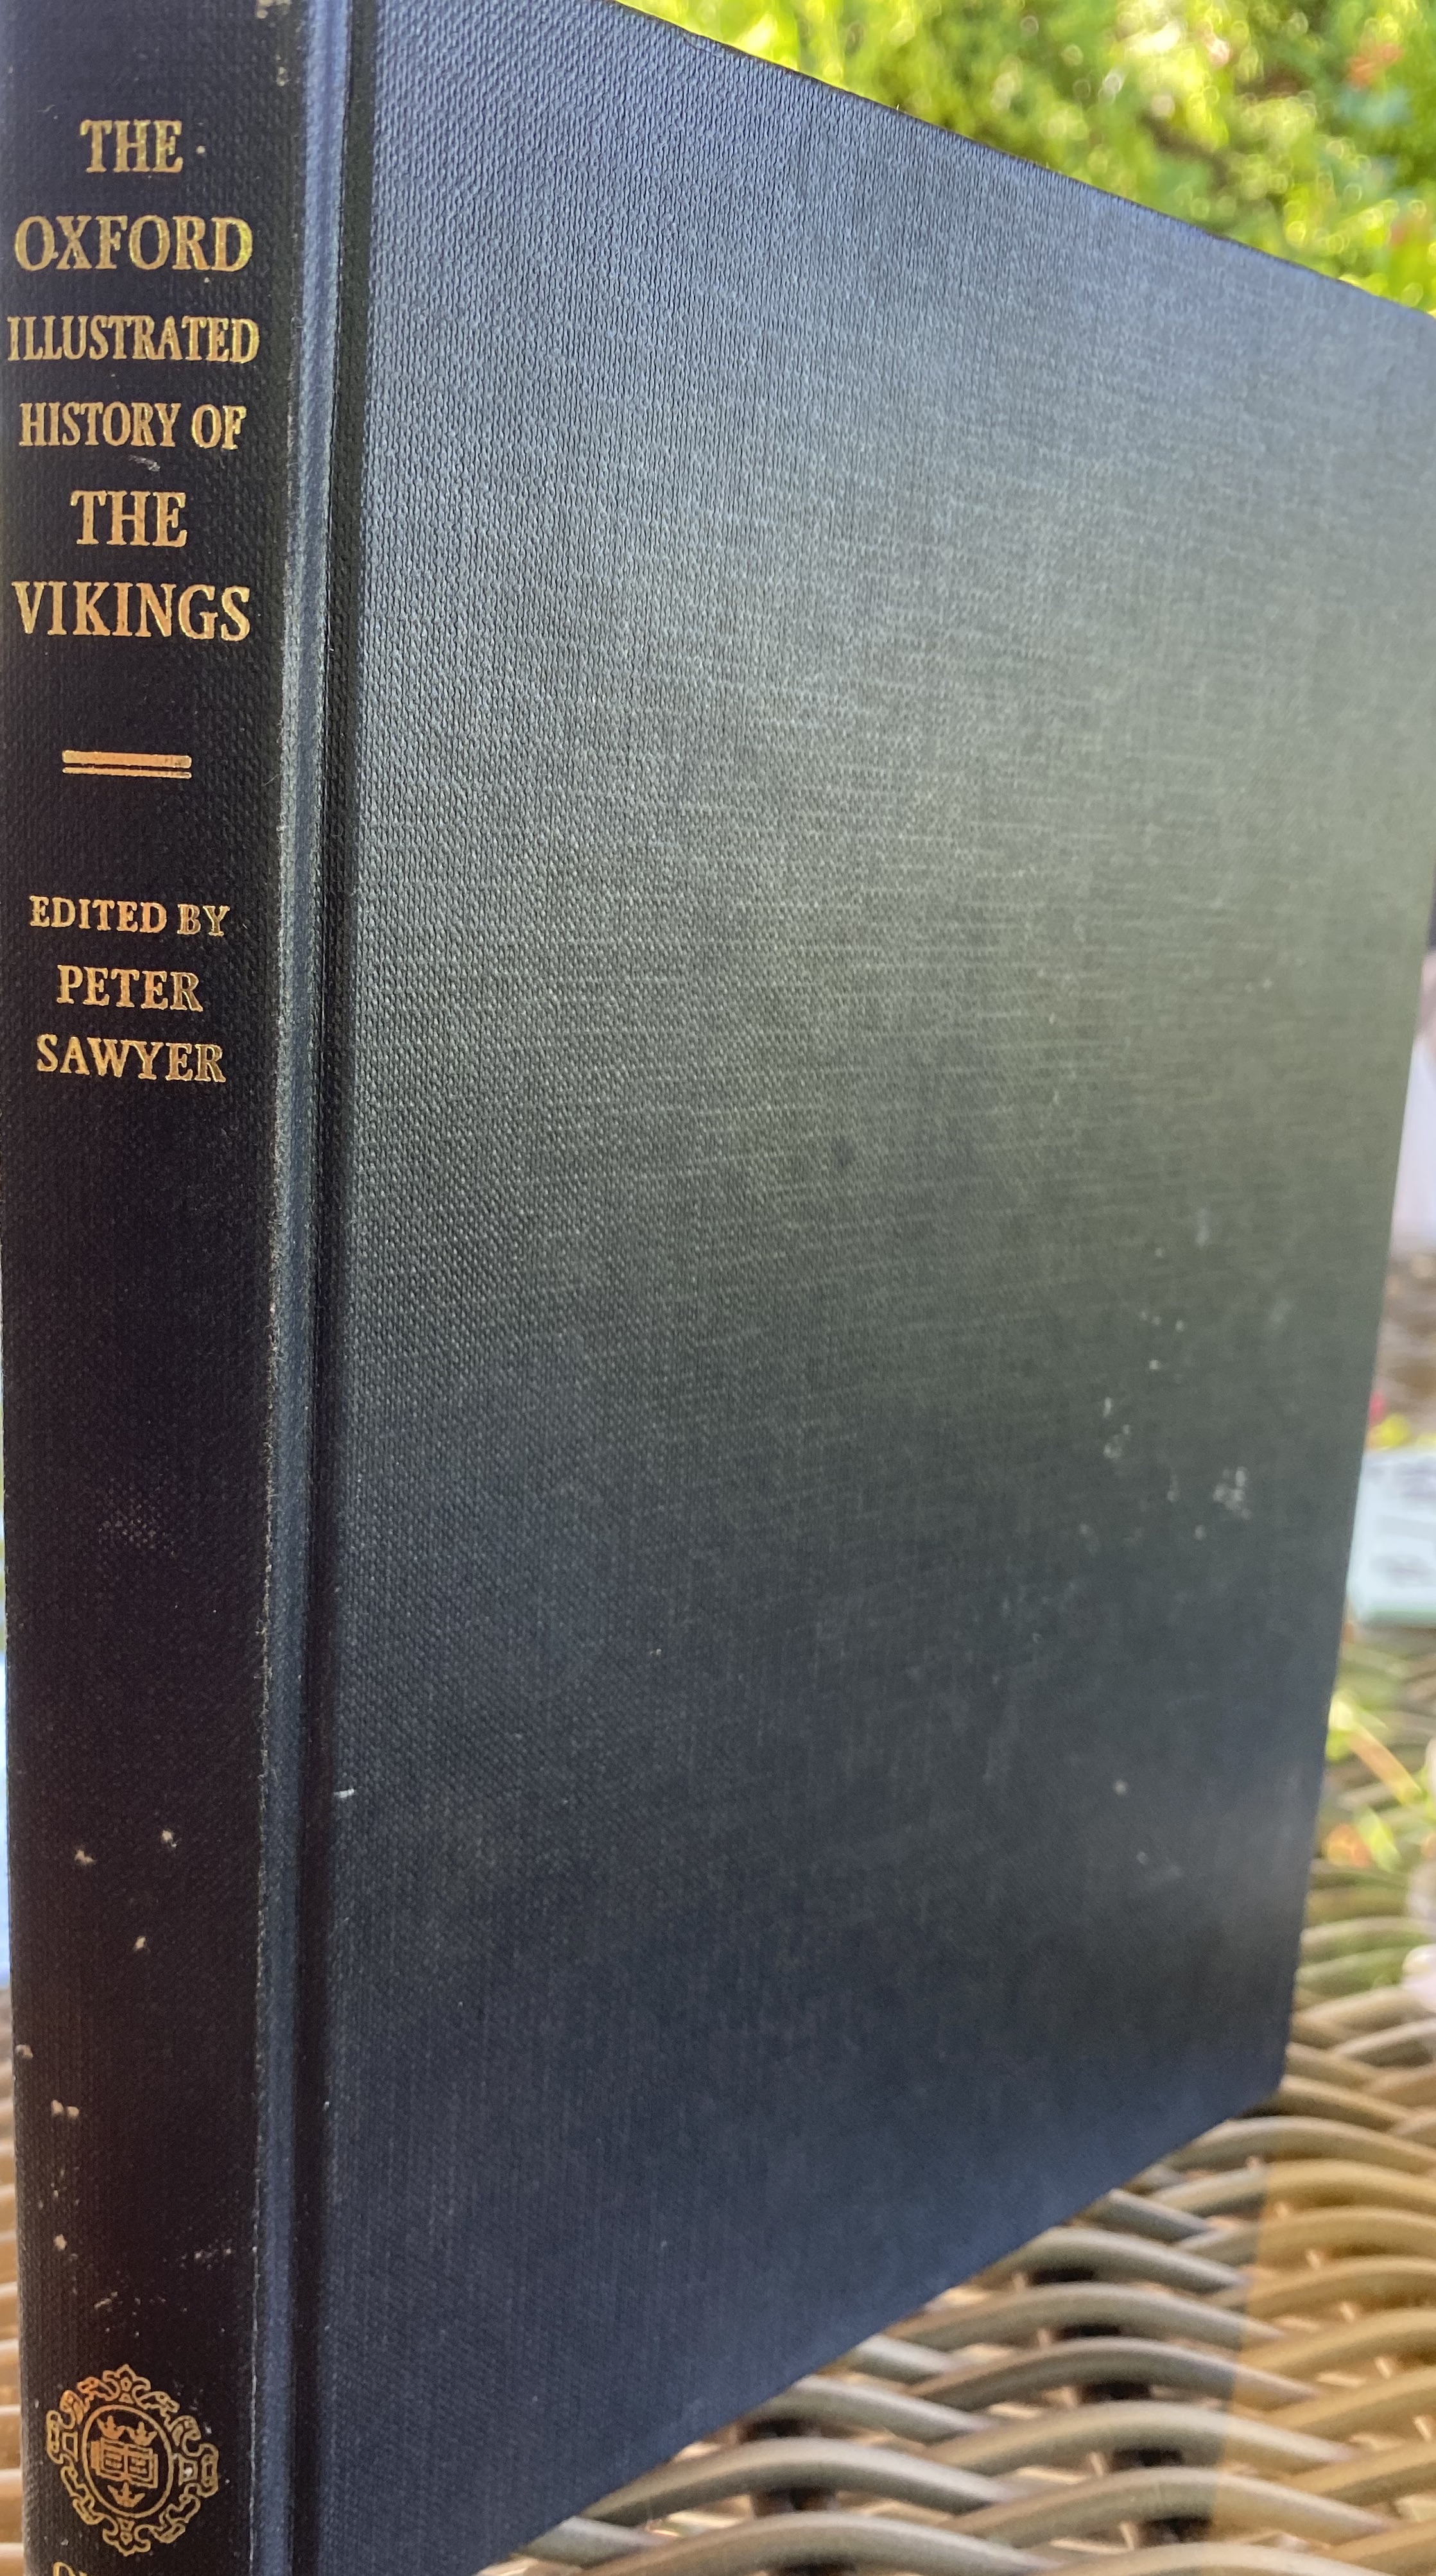 The Oxford illustrated history of the vikings